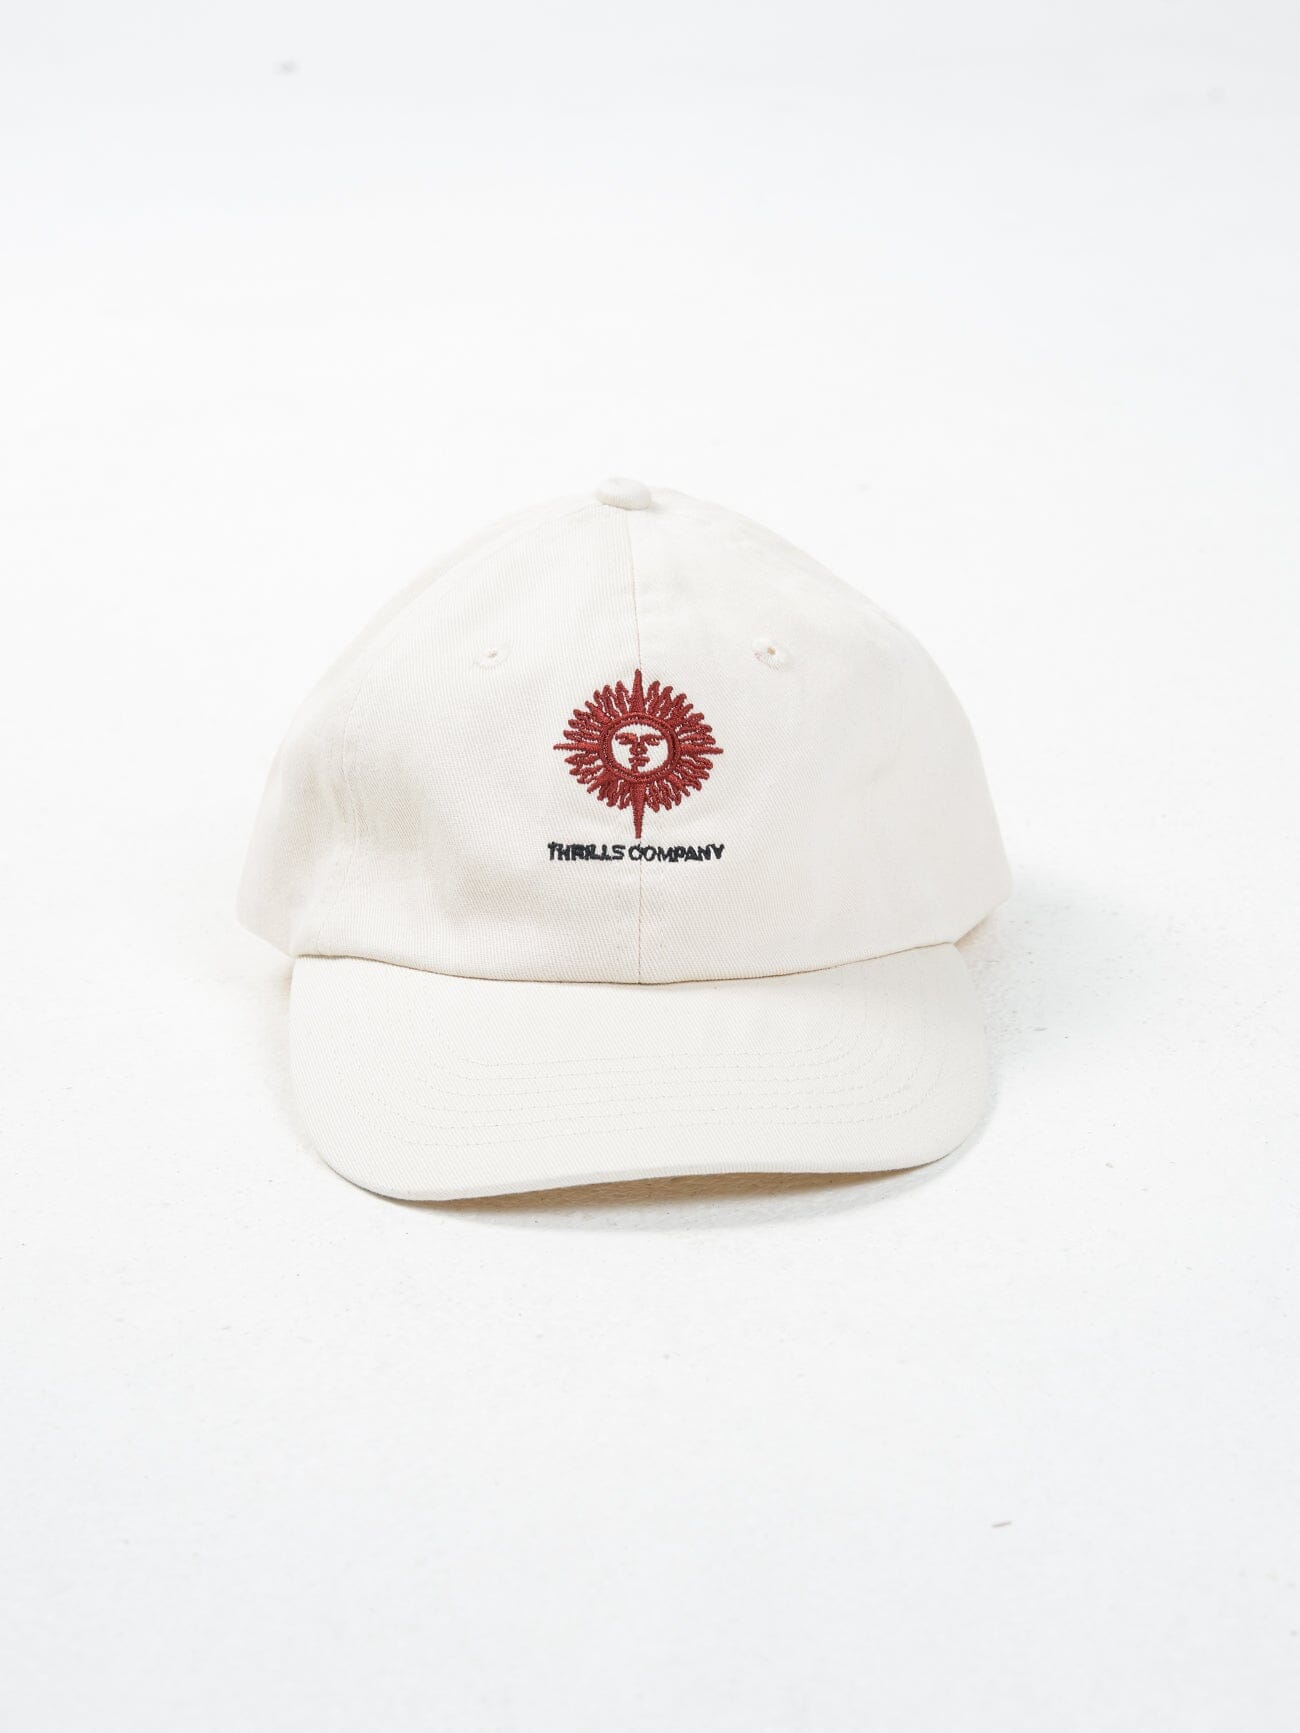 Natural Occurences 6 Panel Cap - Heritage White